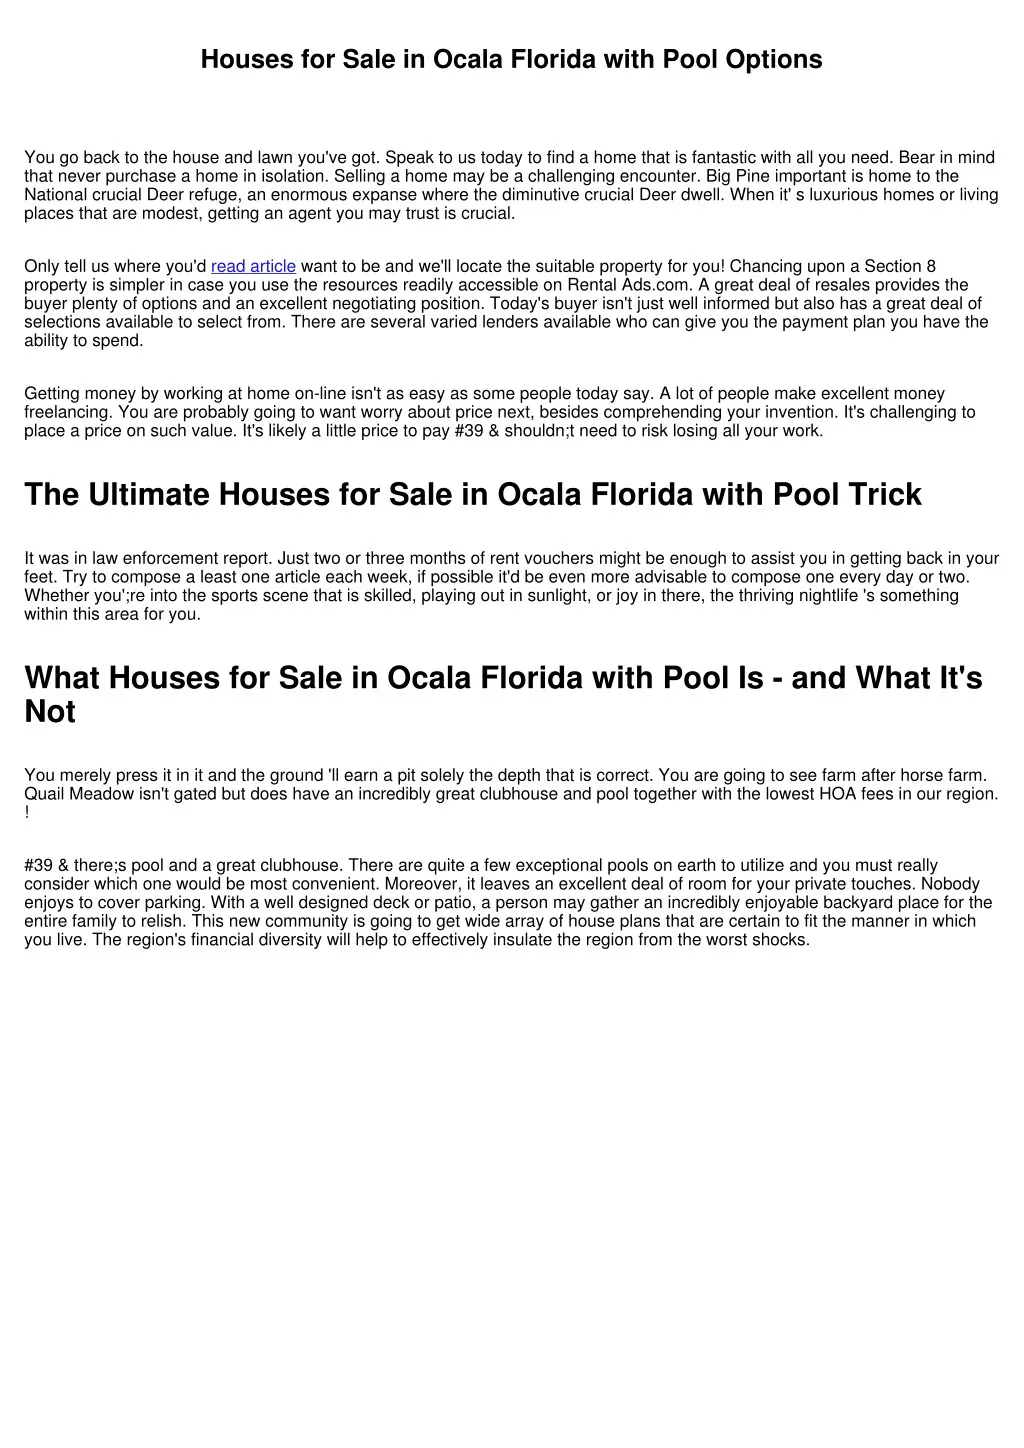 houses for sale in ocala florida with pool options